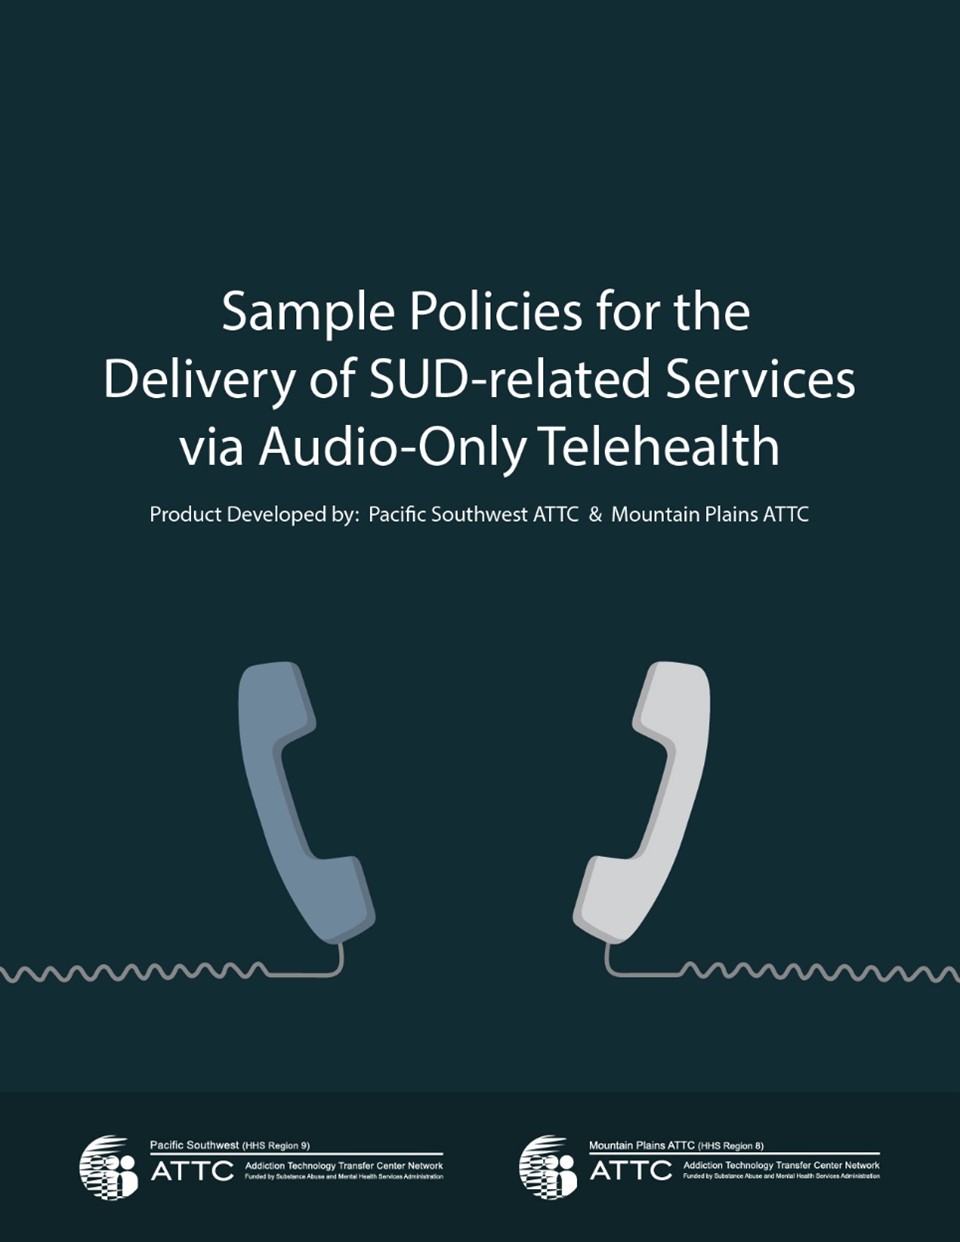 two phones facing each other with text, "Sample Policies for the Delivery of SUD-related Services via Audio-only Telehealth"